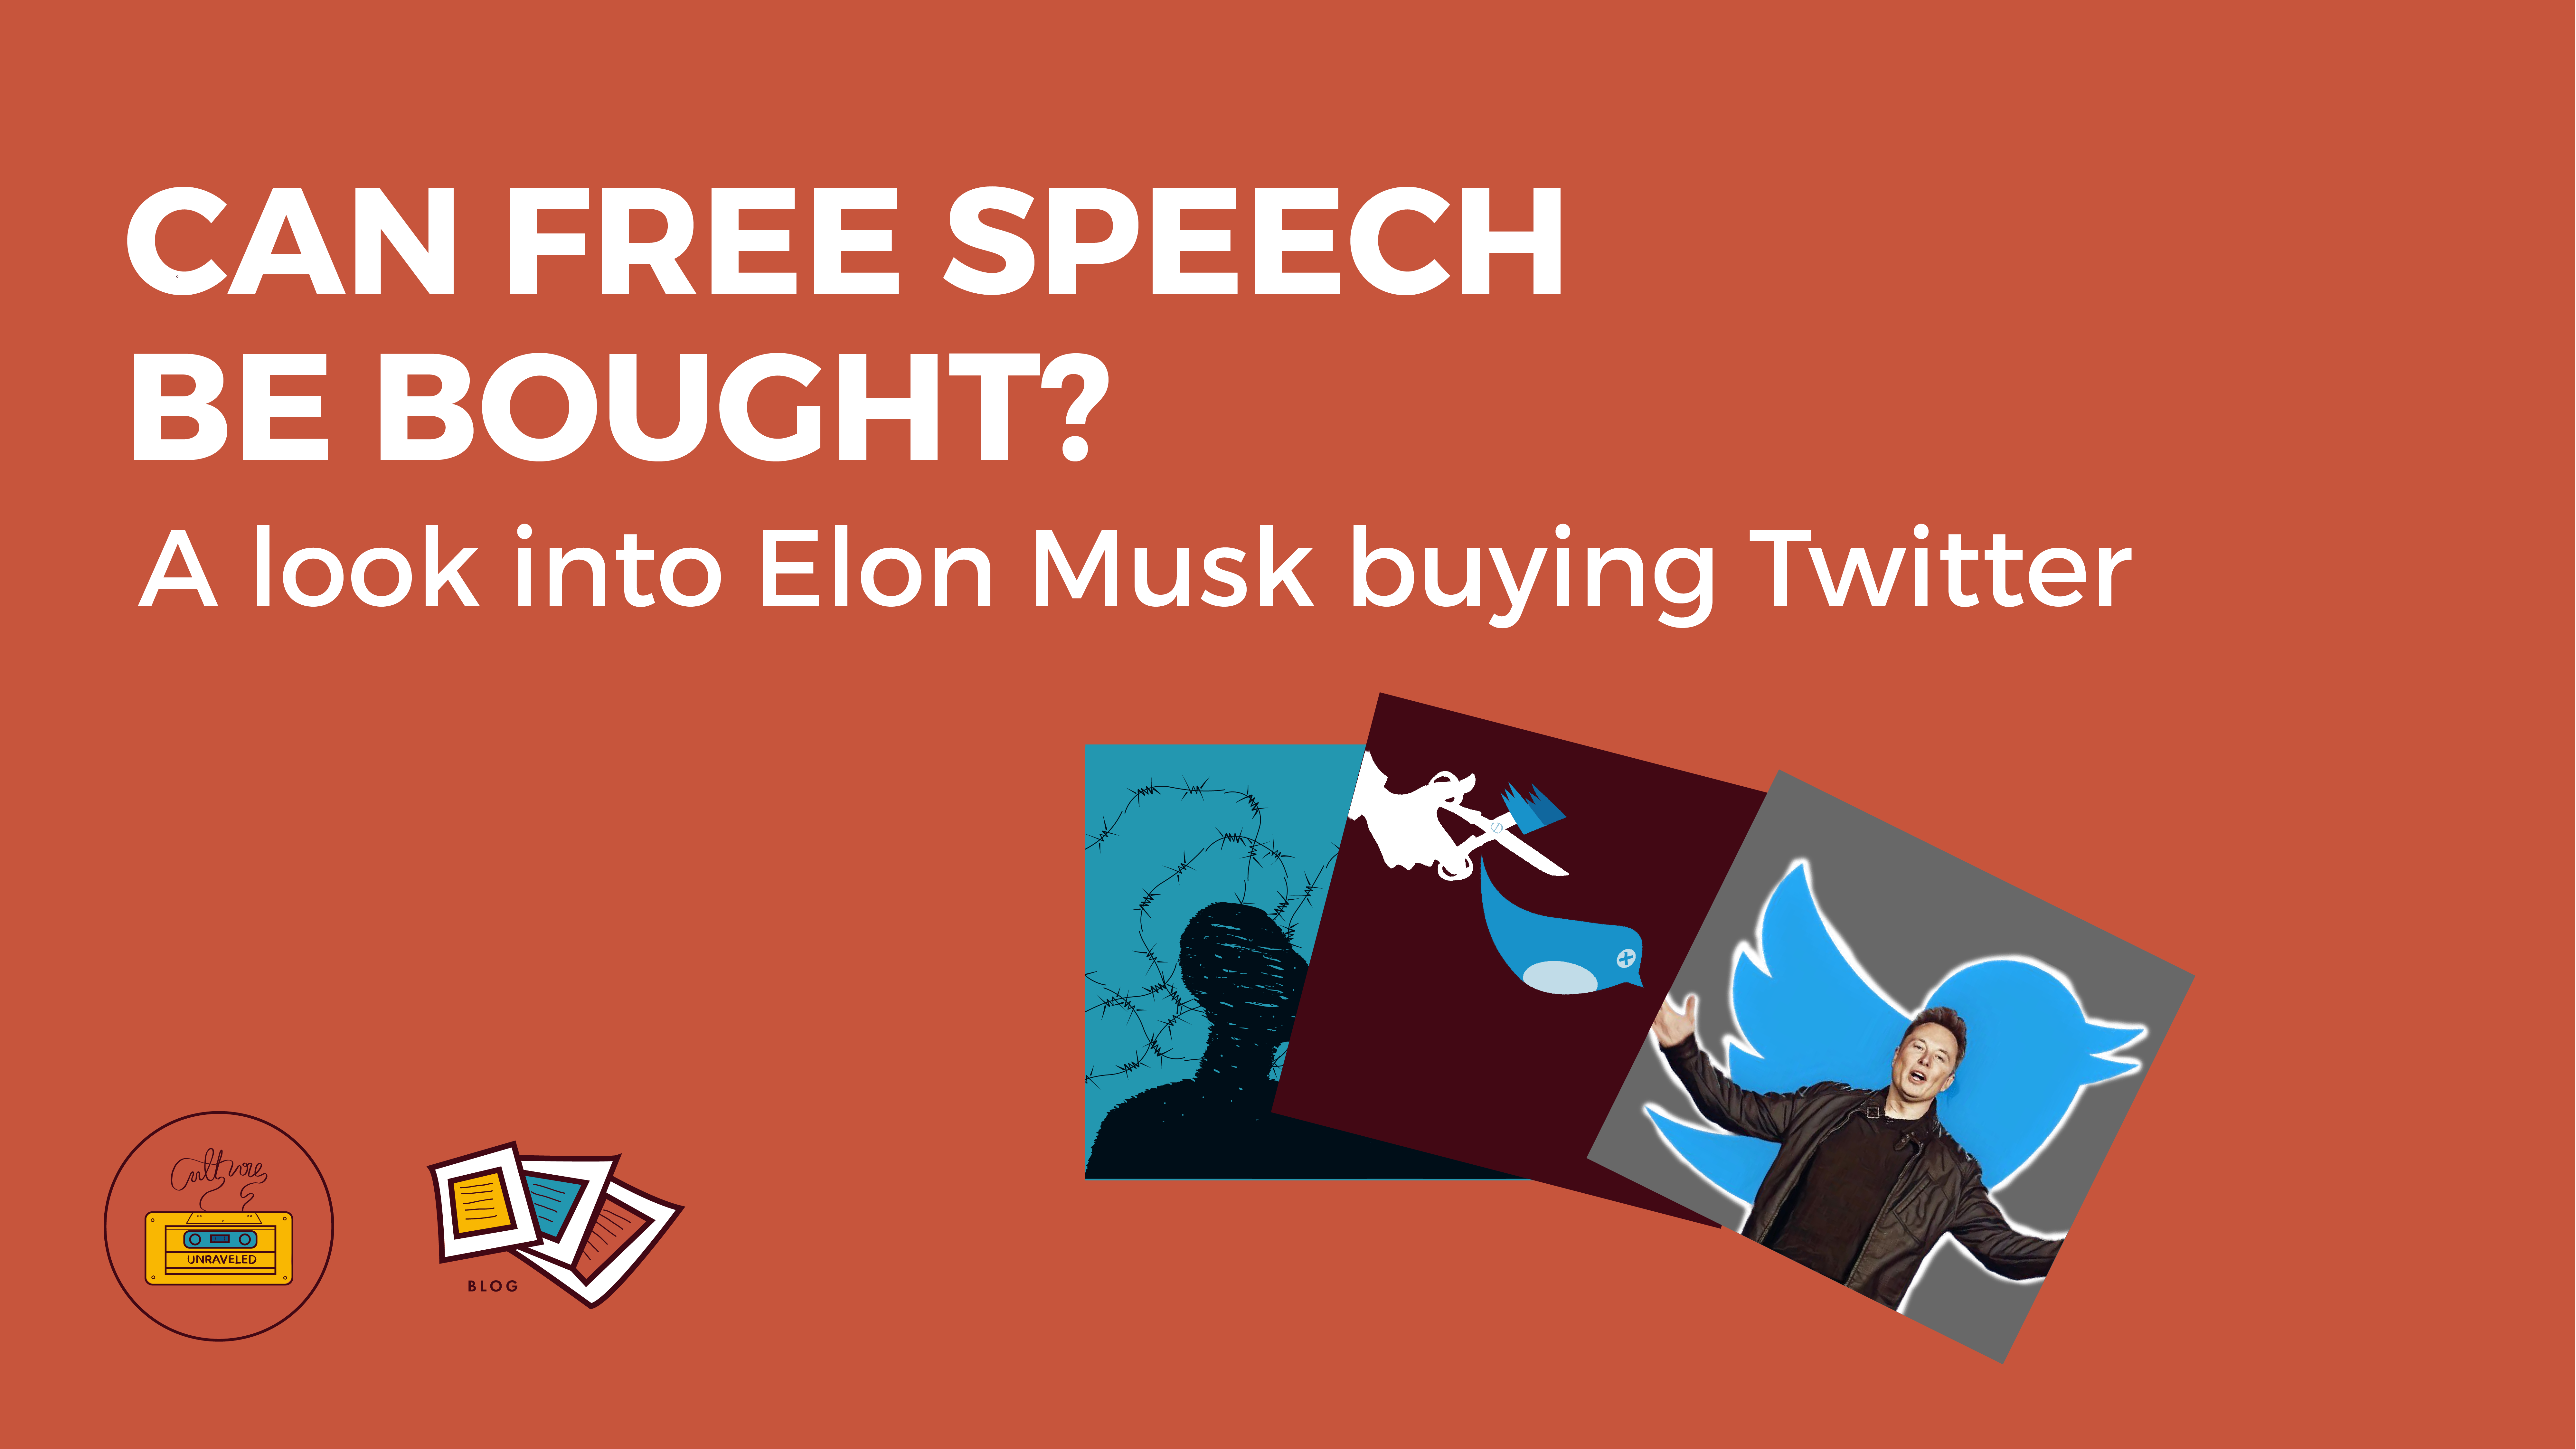 Can Free Speech be Bought? A Look into Elon Musk buying Twitter